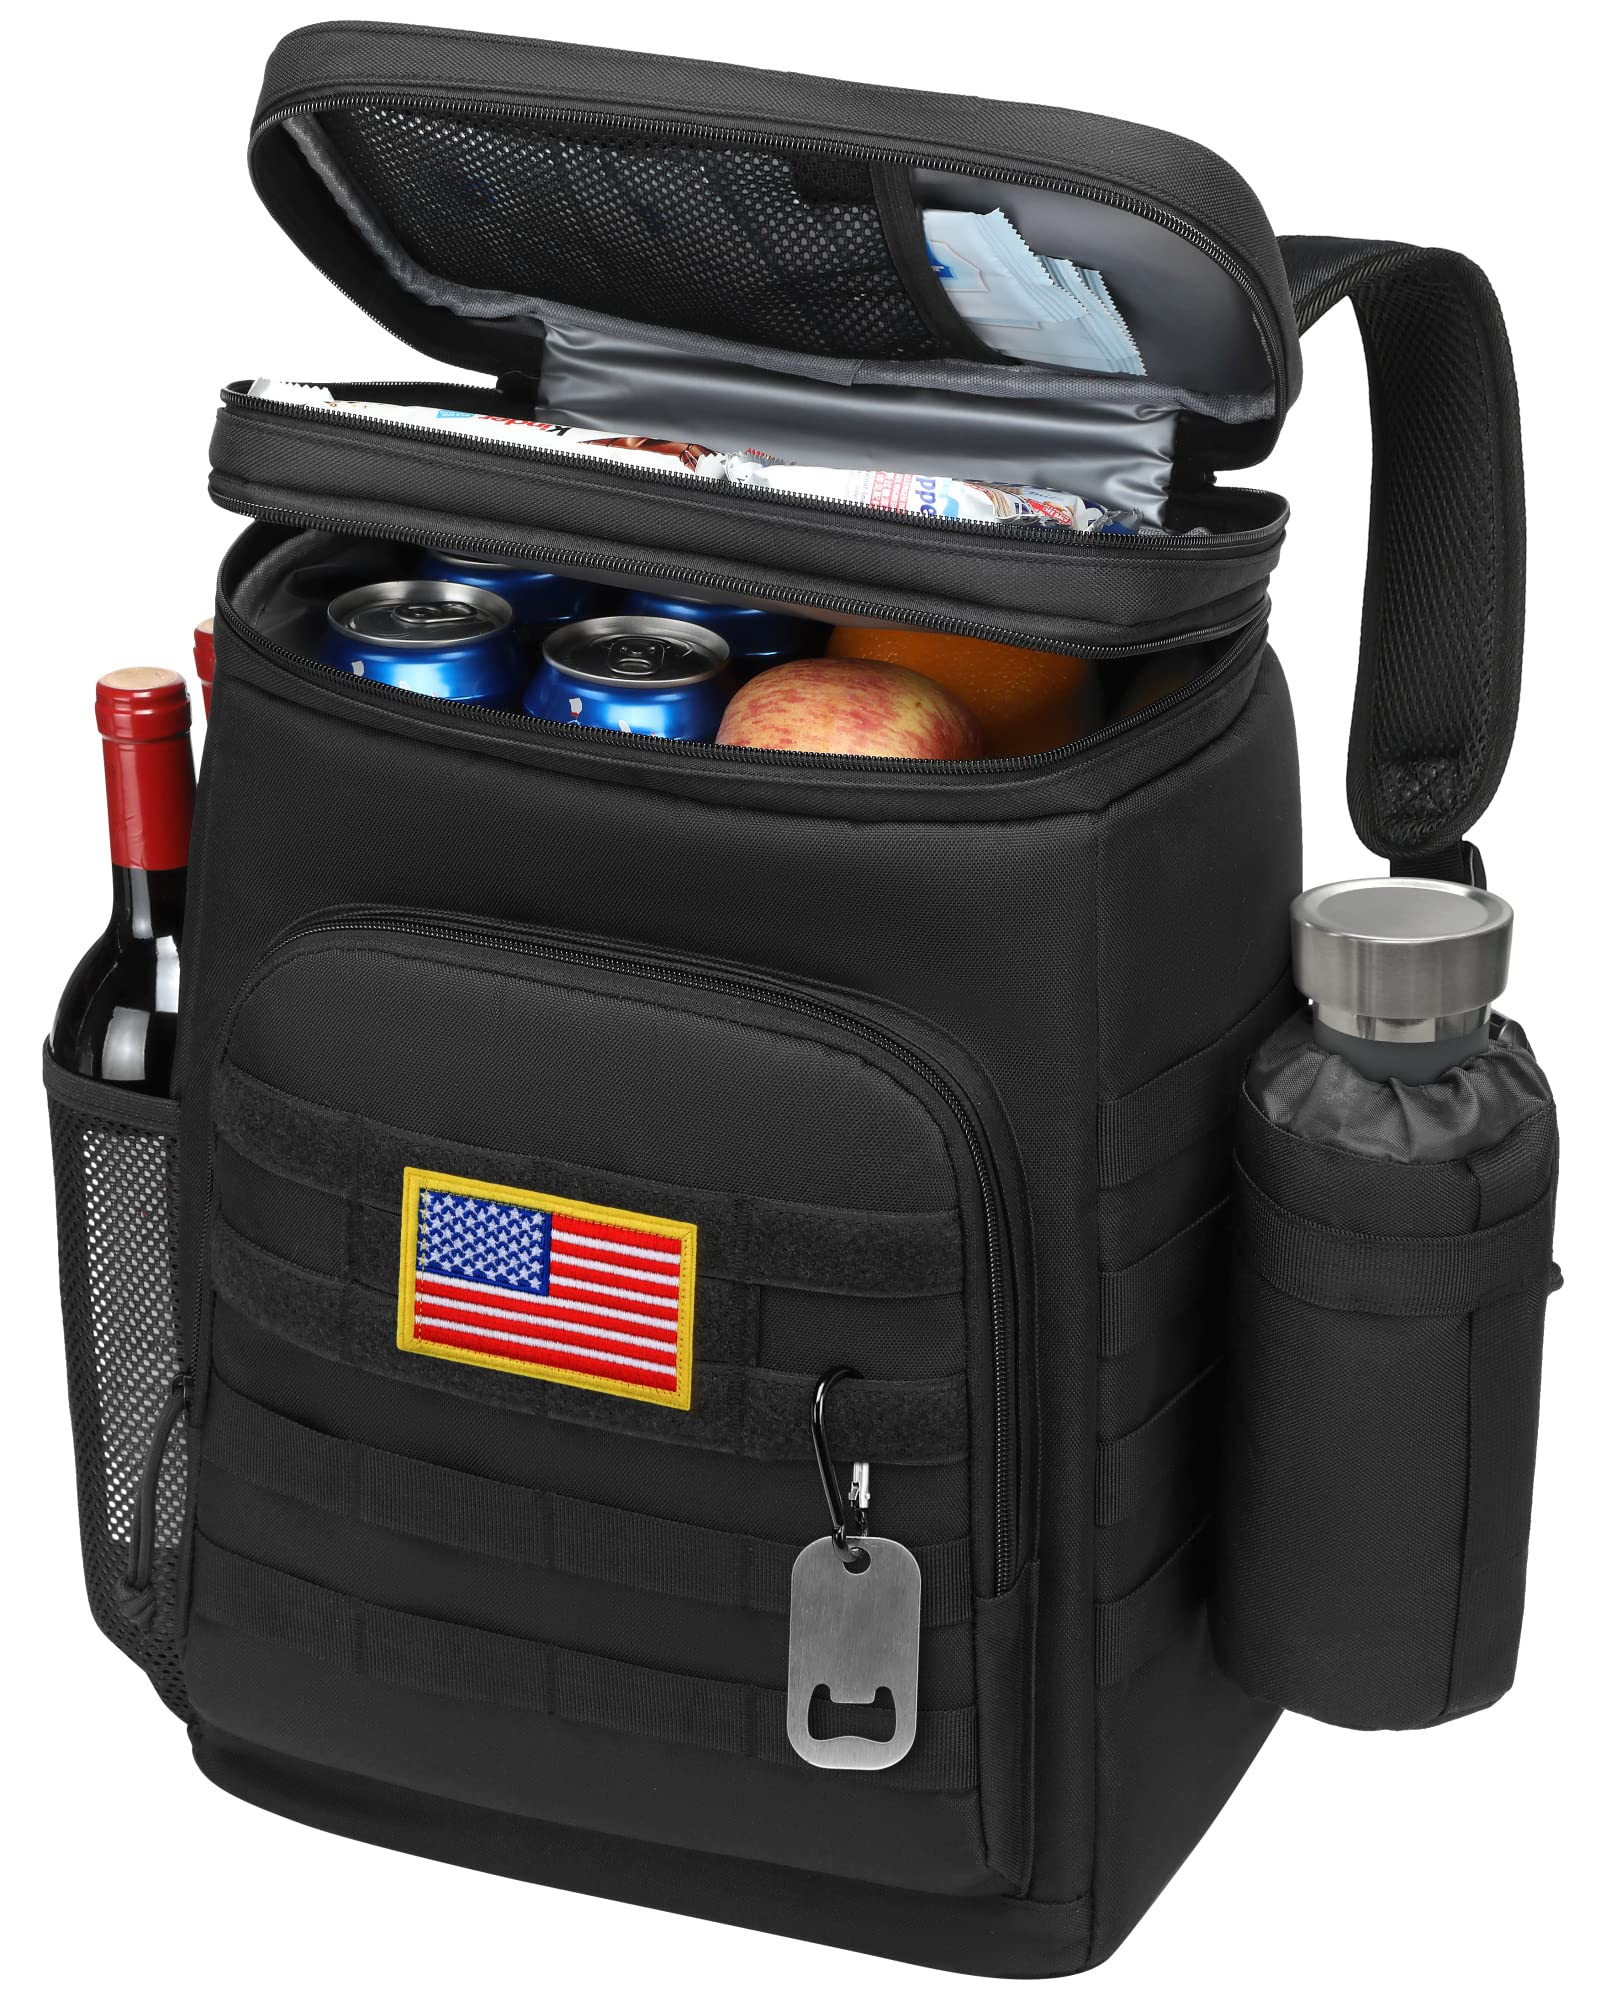 Tacticism Insulated backpack cooler